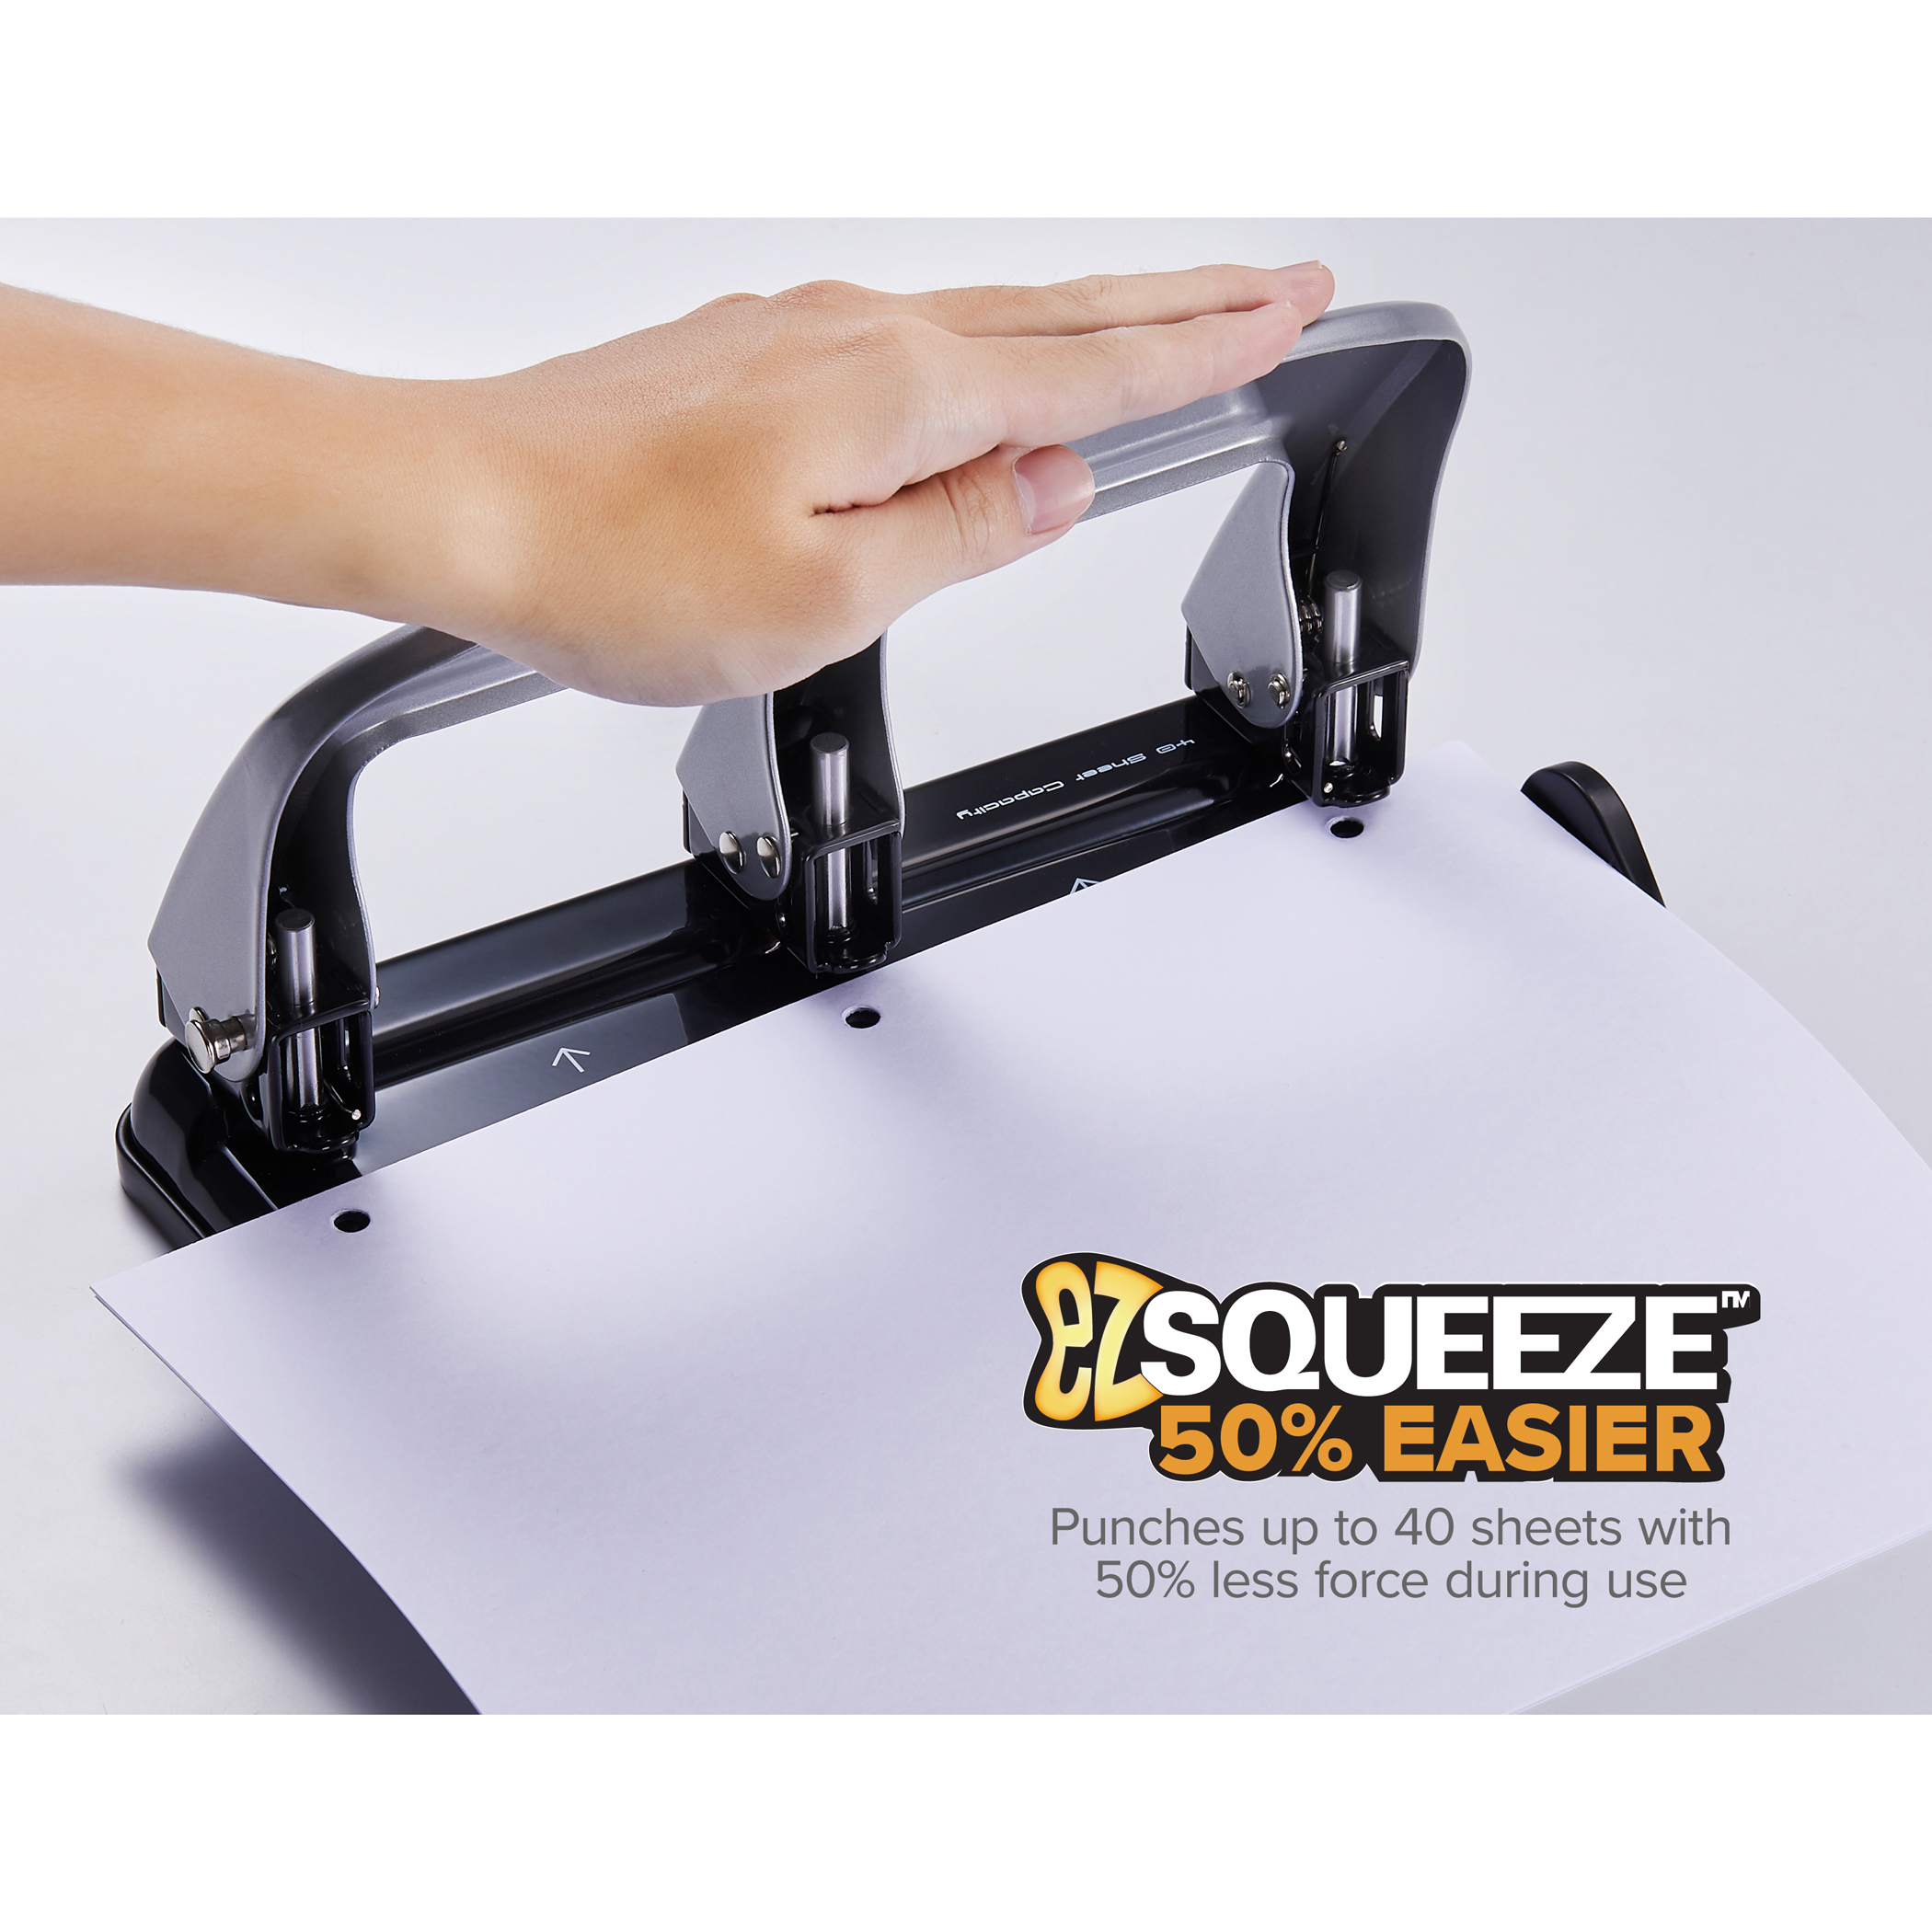 PaperPro Easy One Hole Punch